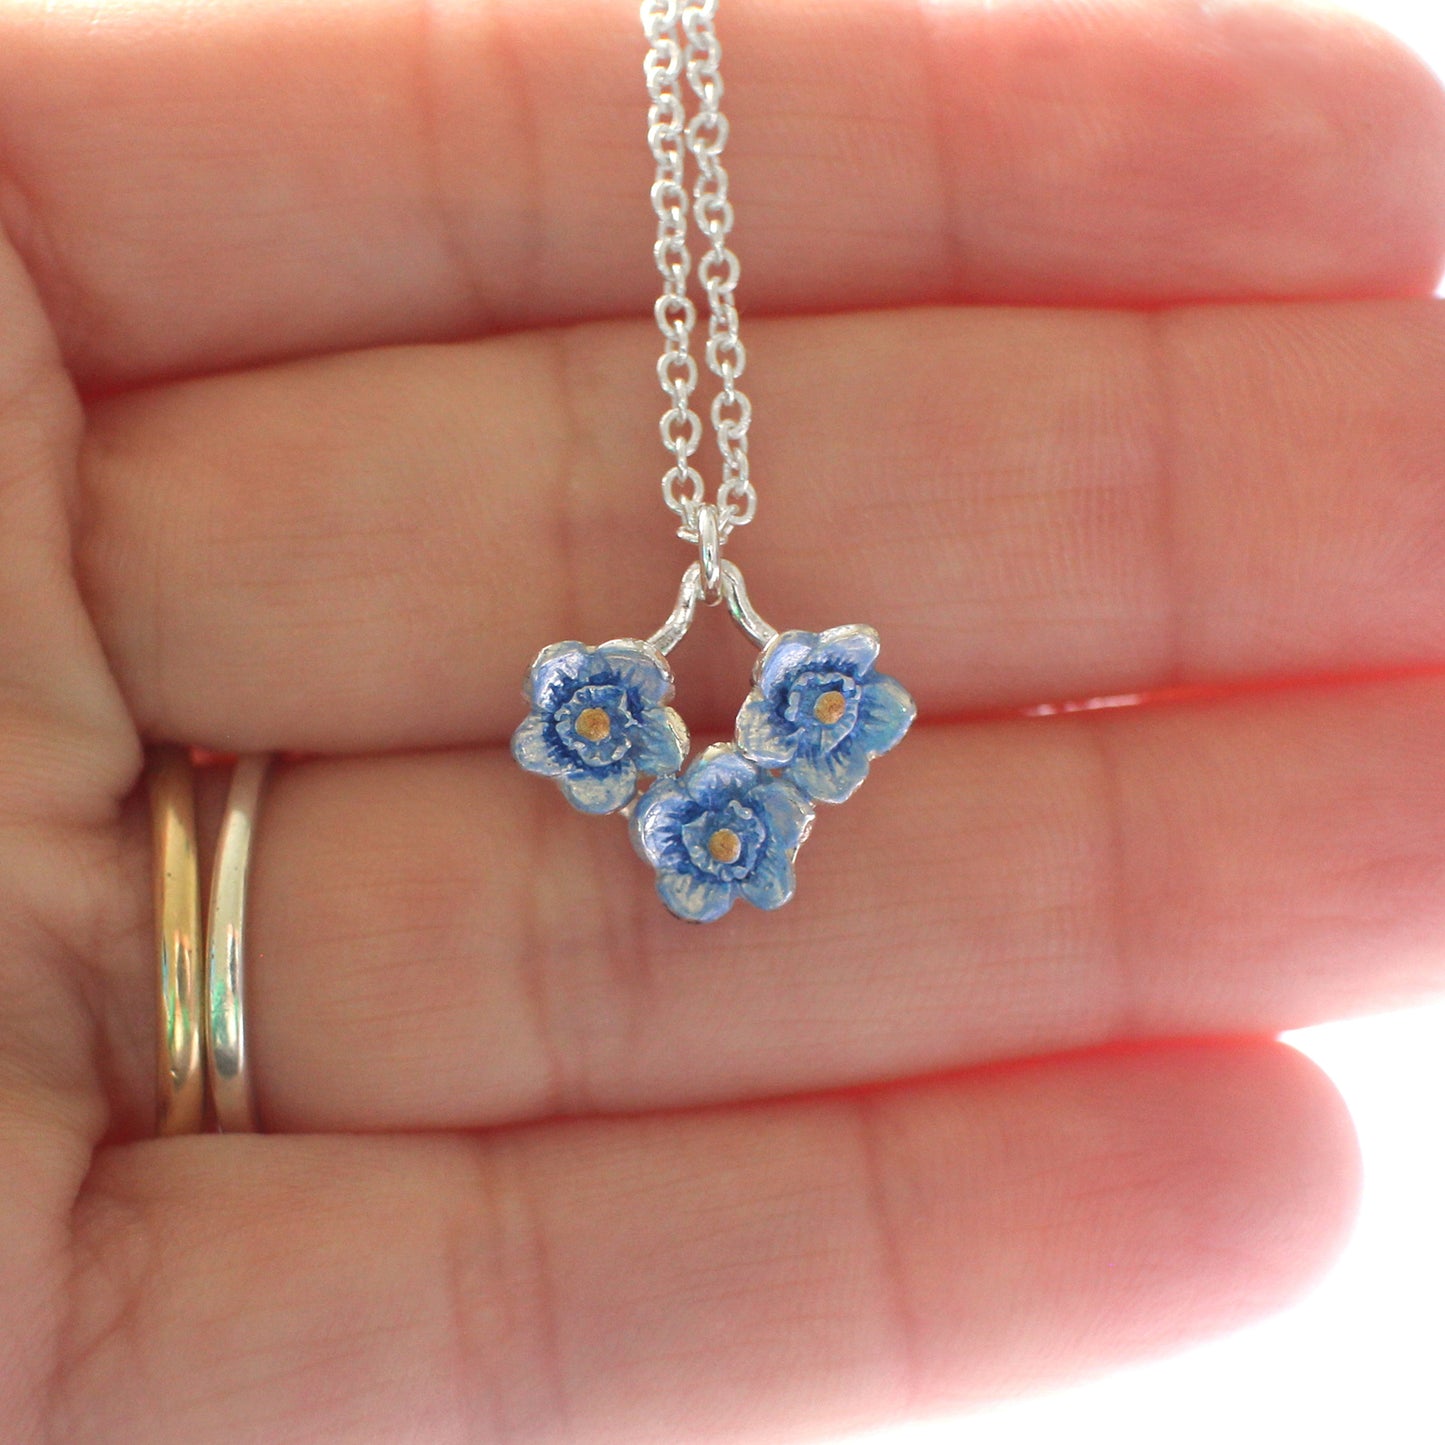 Forget Me Not Trio Necklace